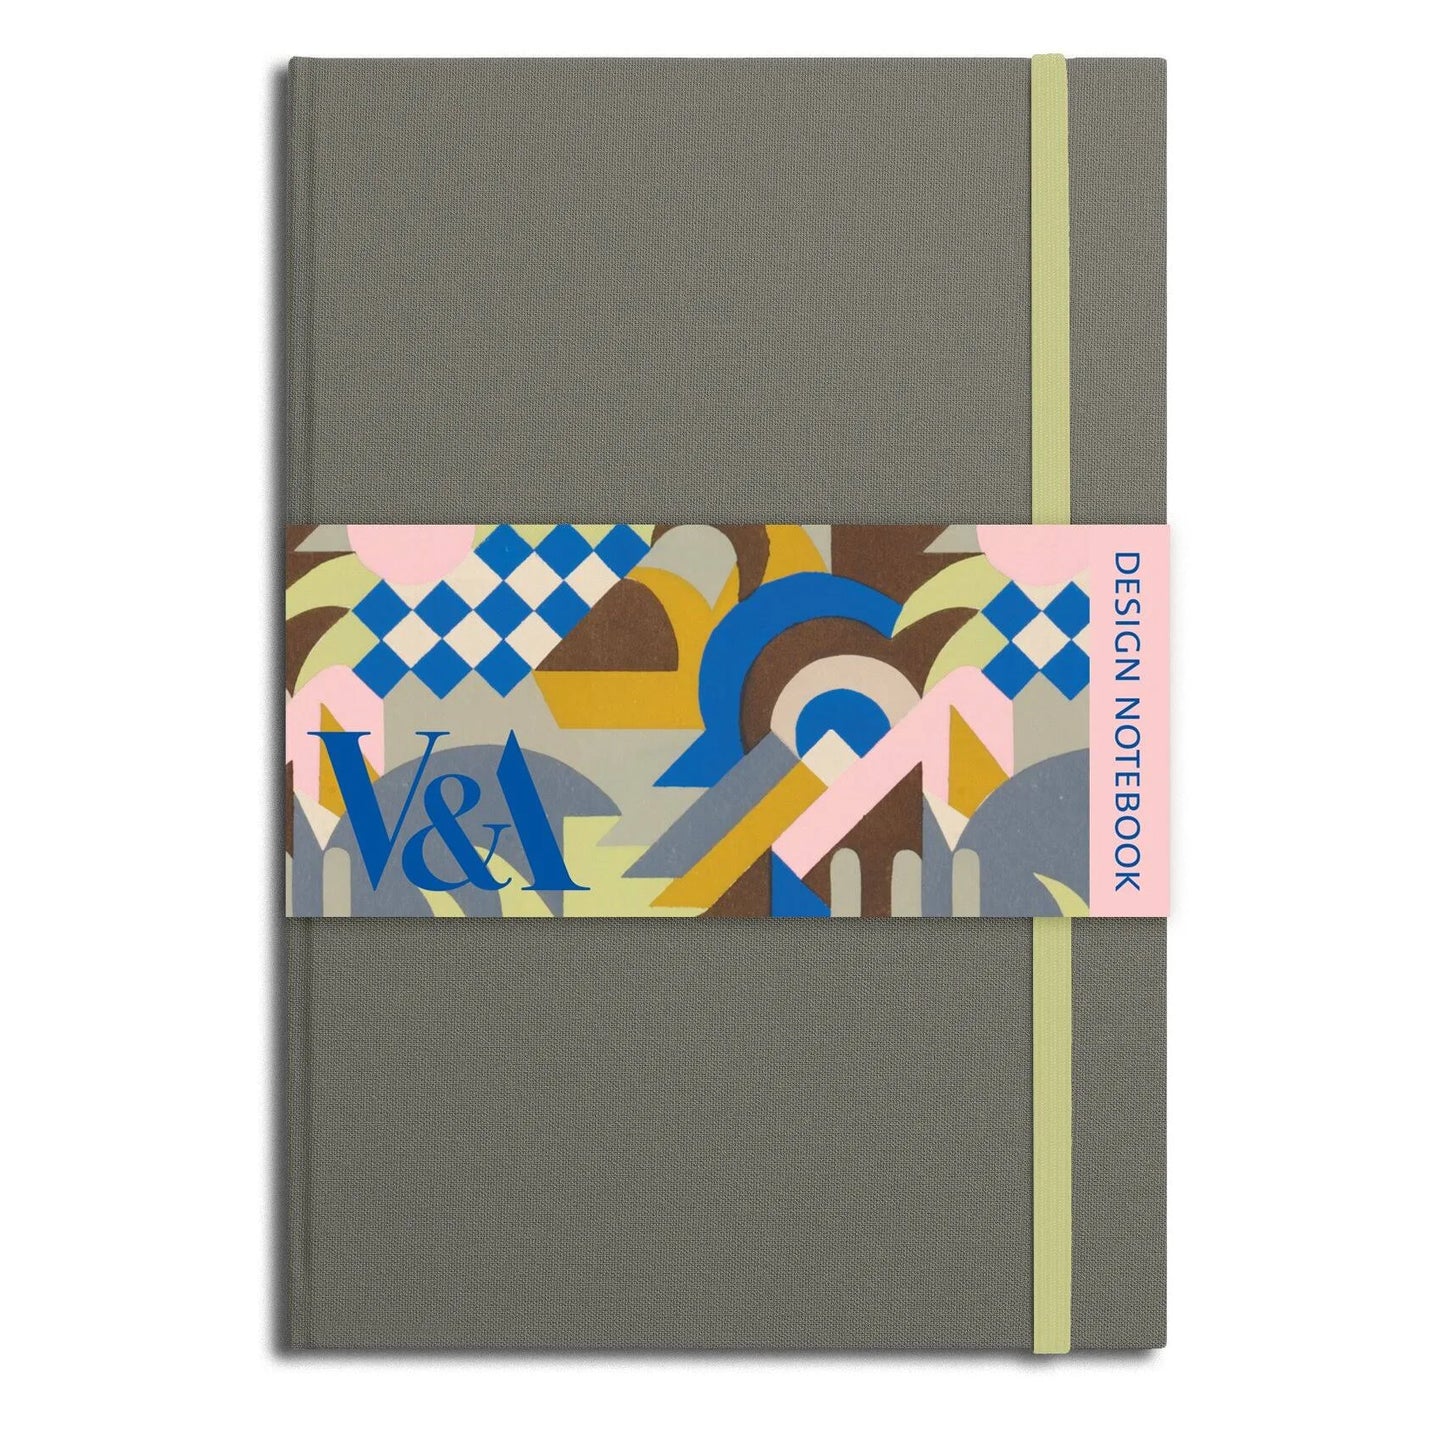 V & A Design Notebooks Eclectopia Gifts and Specialty Homewares 